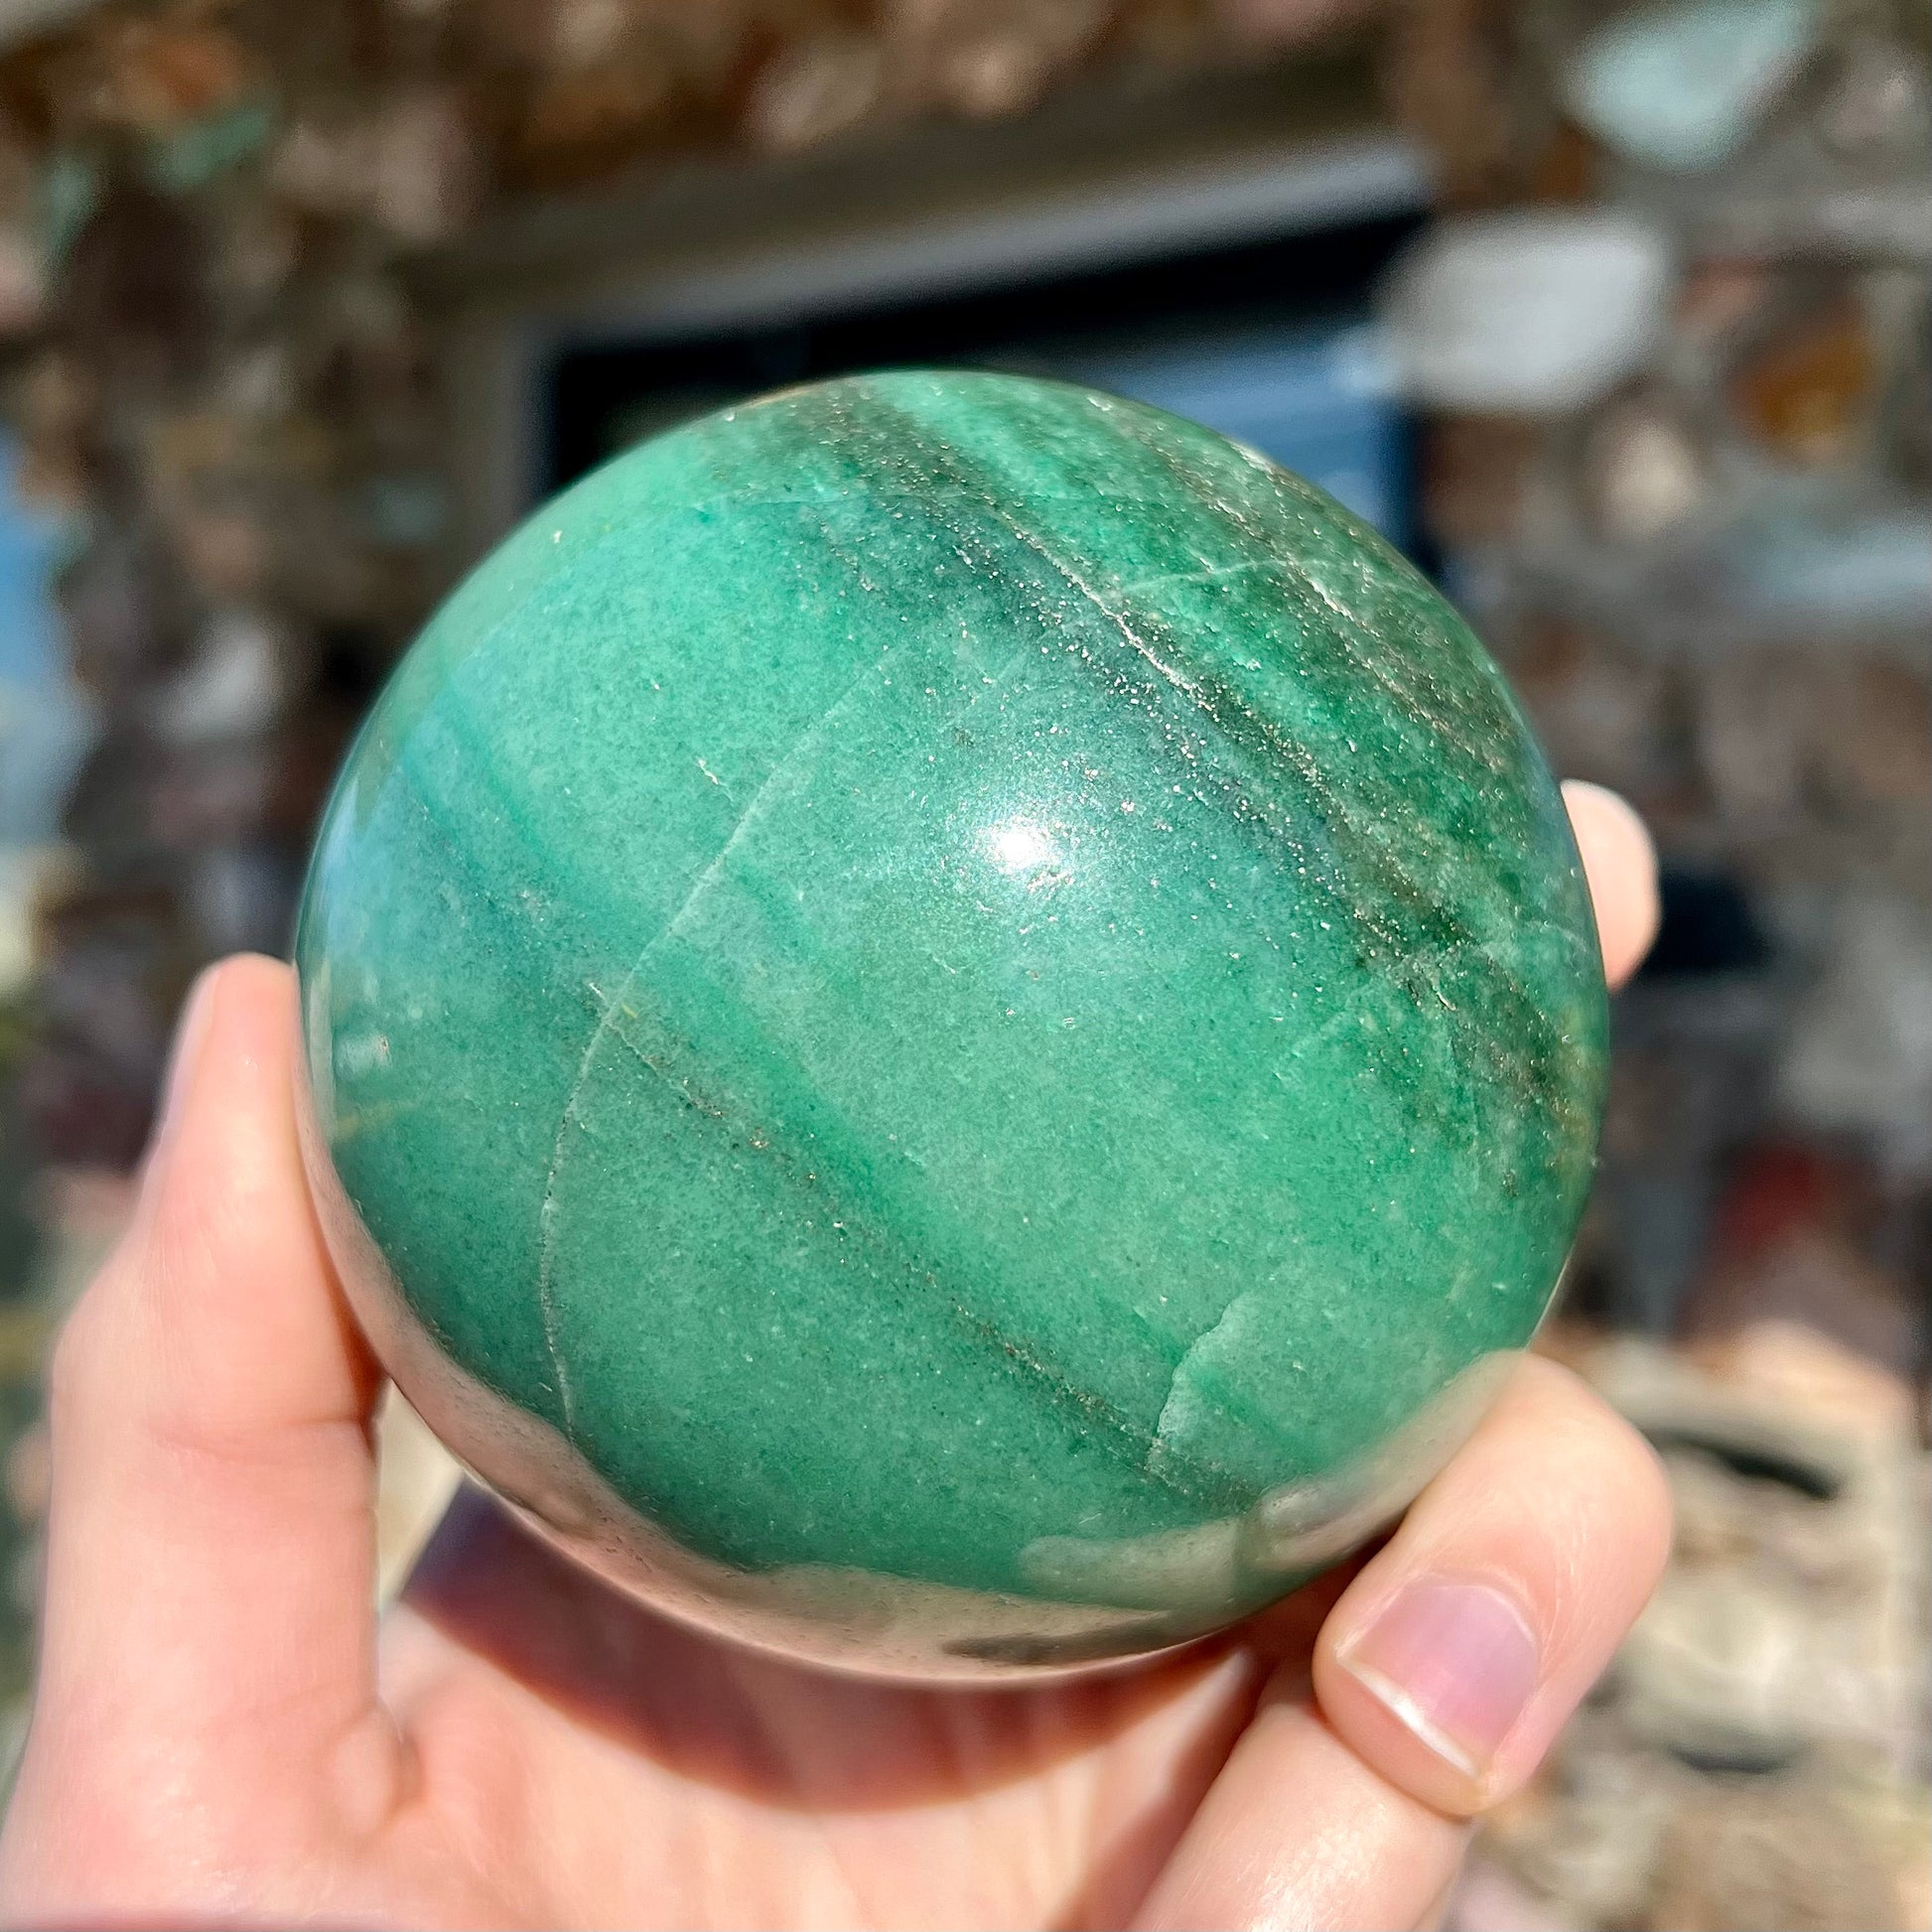 A stone sphere carved from natural green aventurine quartz with containing mica inclusions.